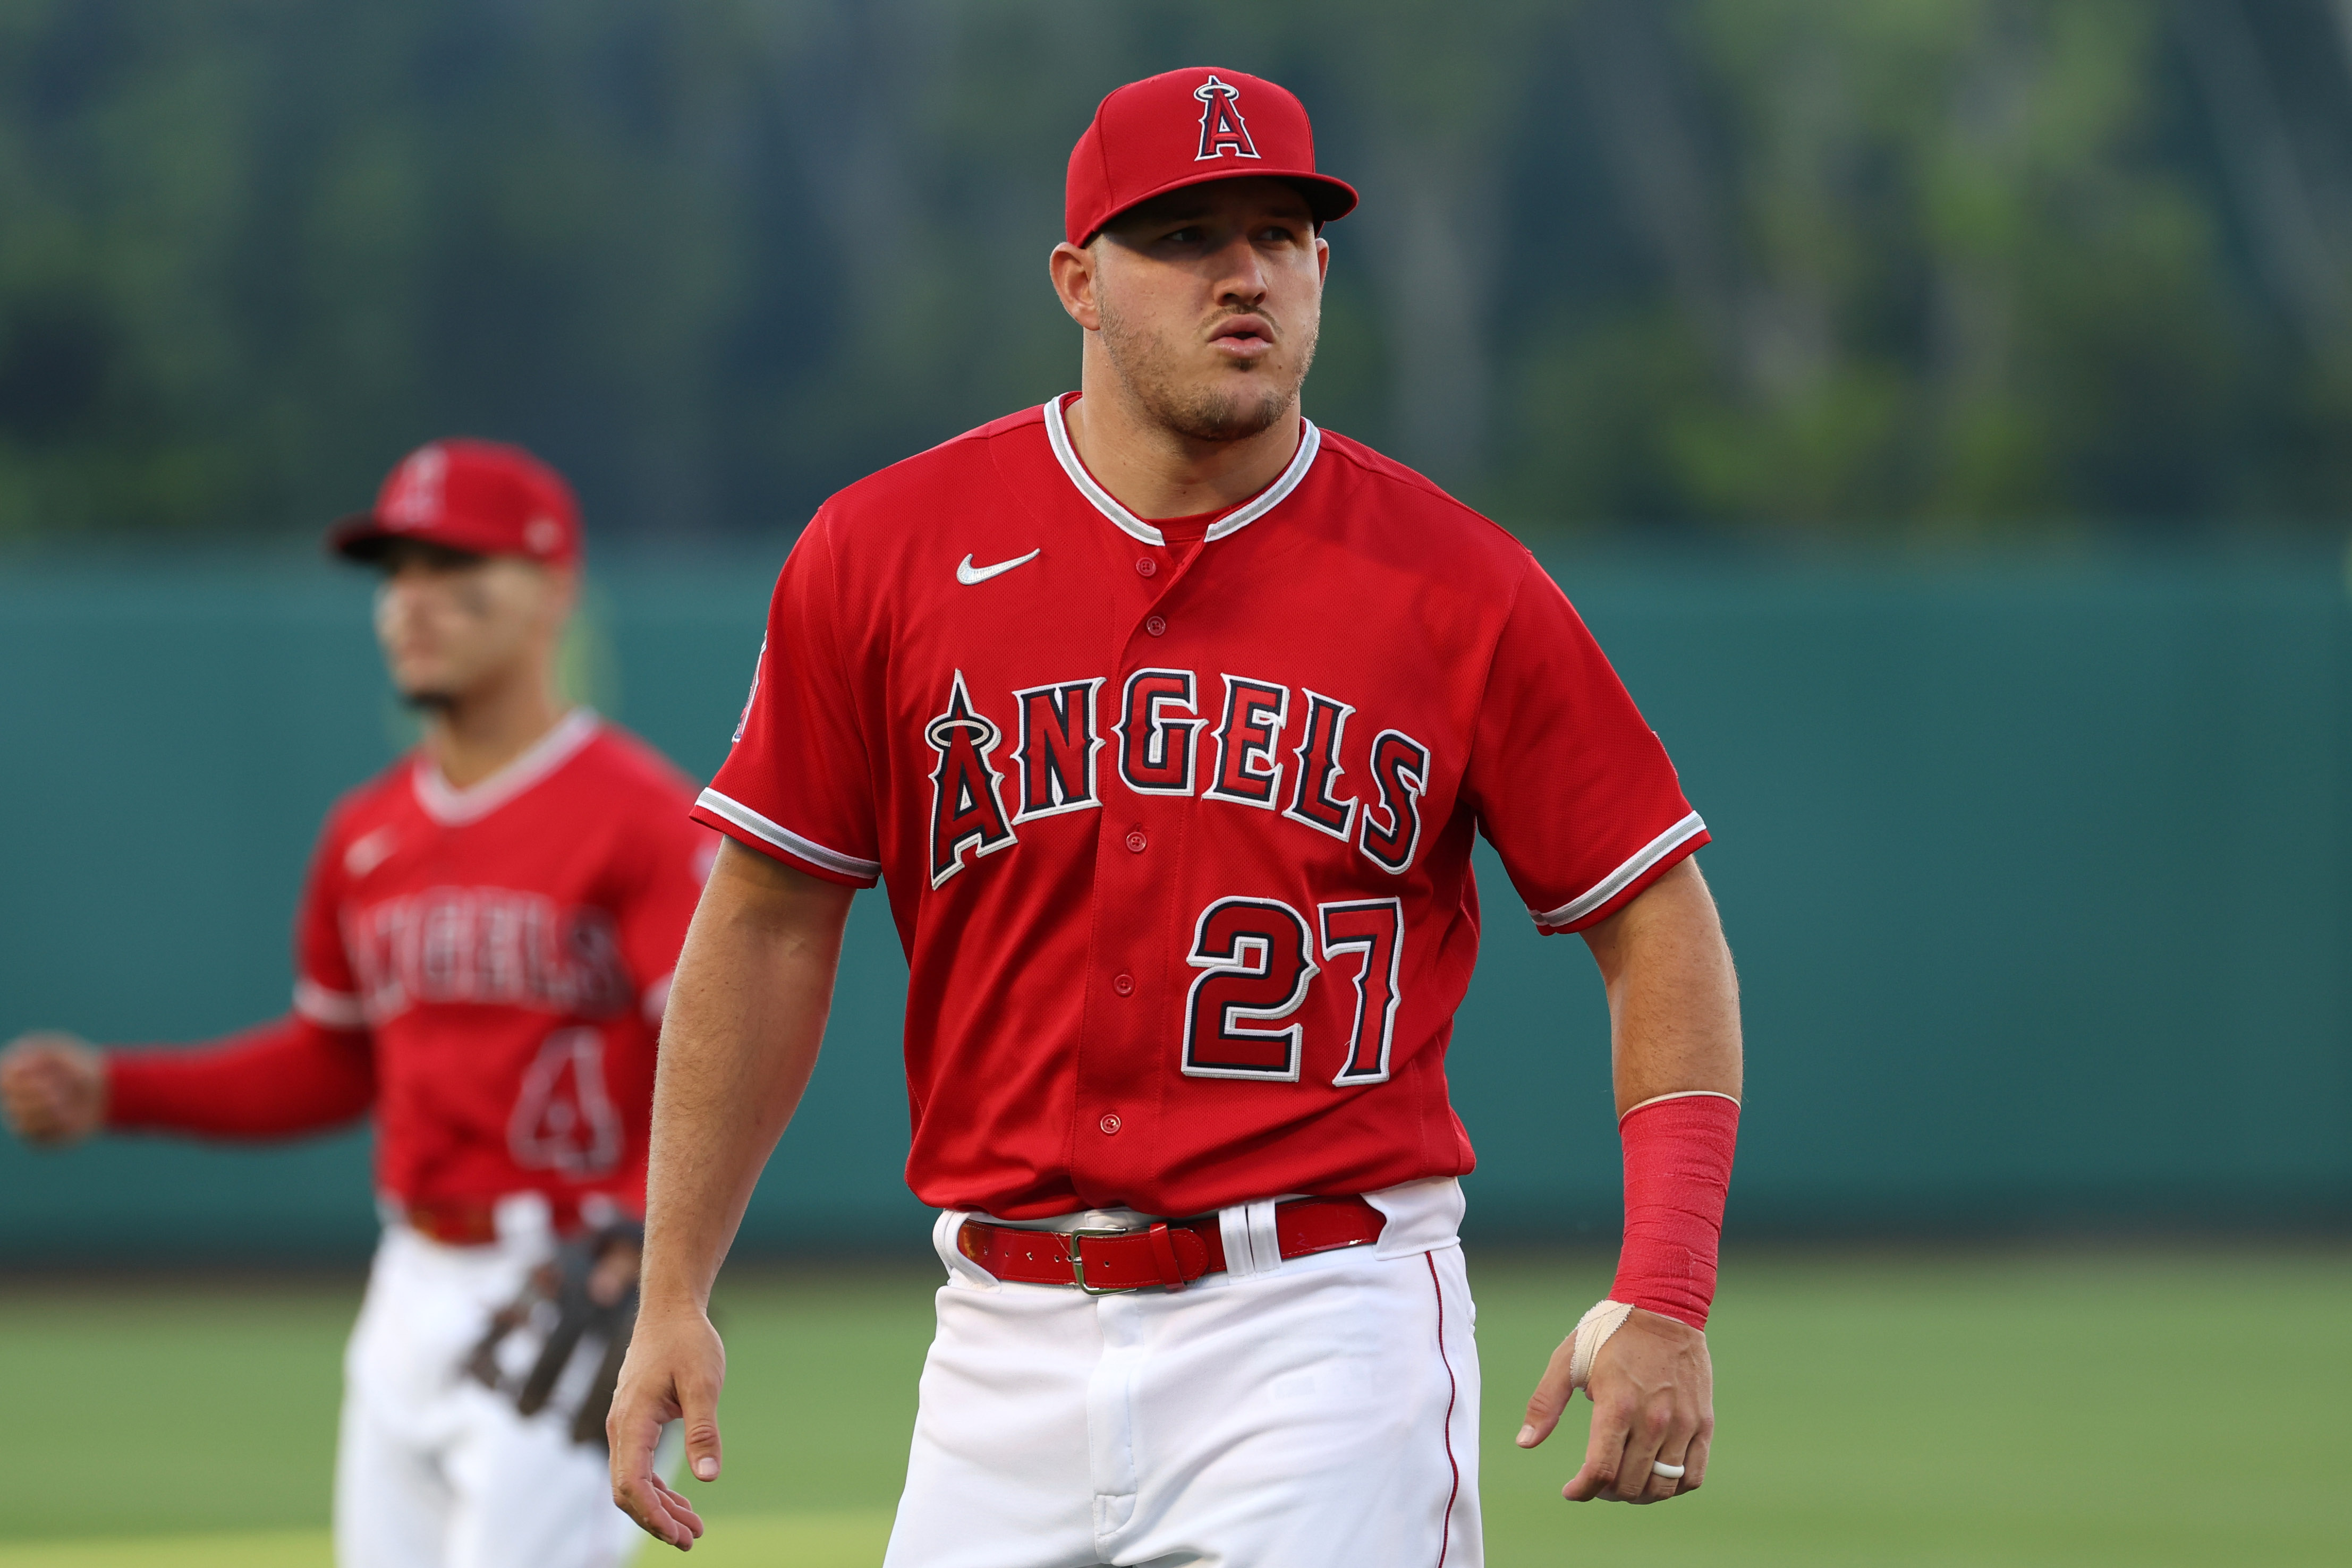 Mike Trout Back Signed Los Angeles Angels 2020 Alternate Jersey